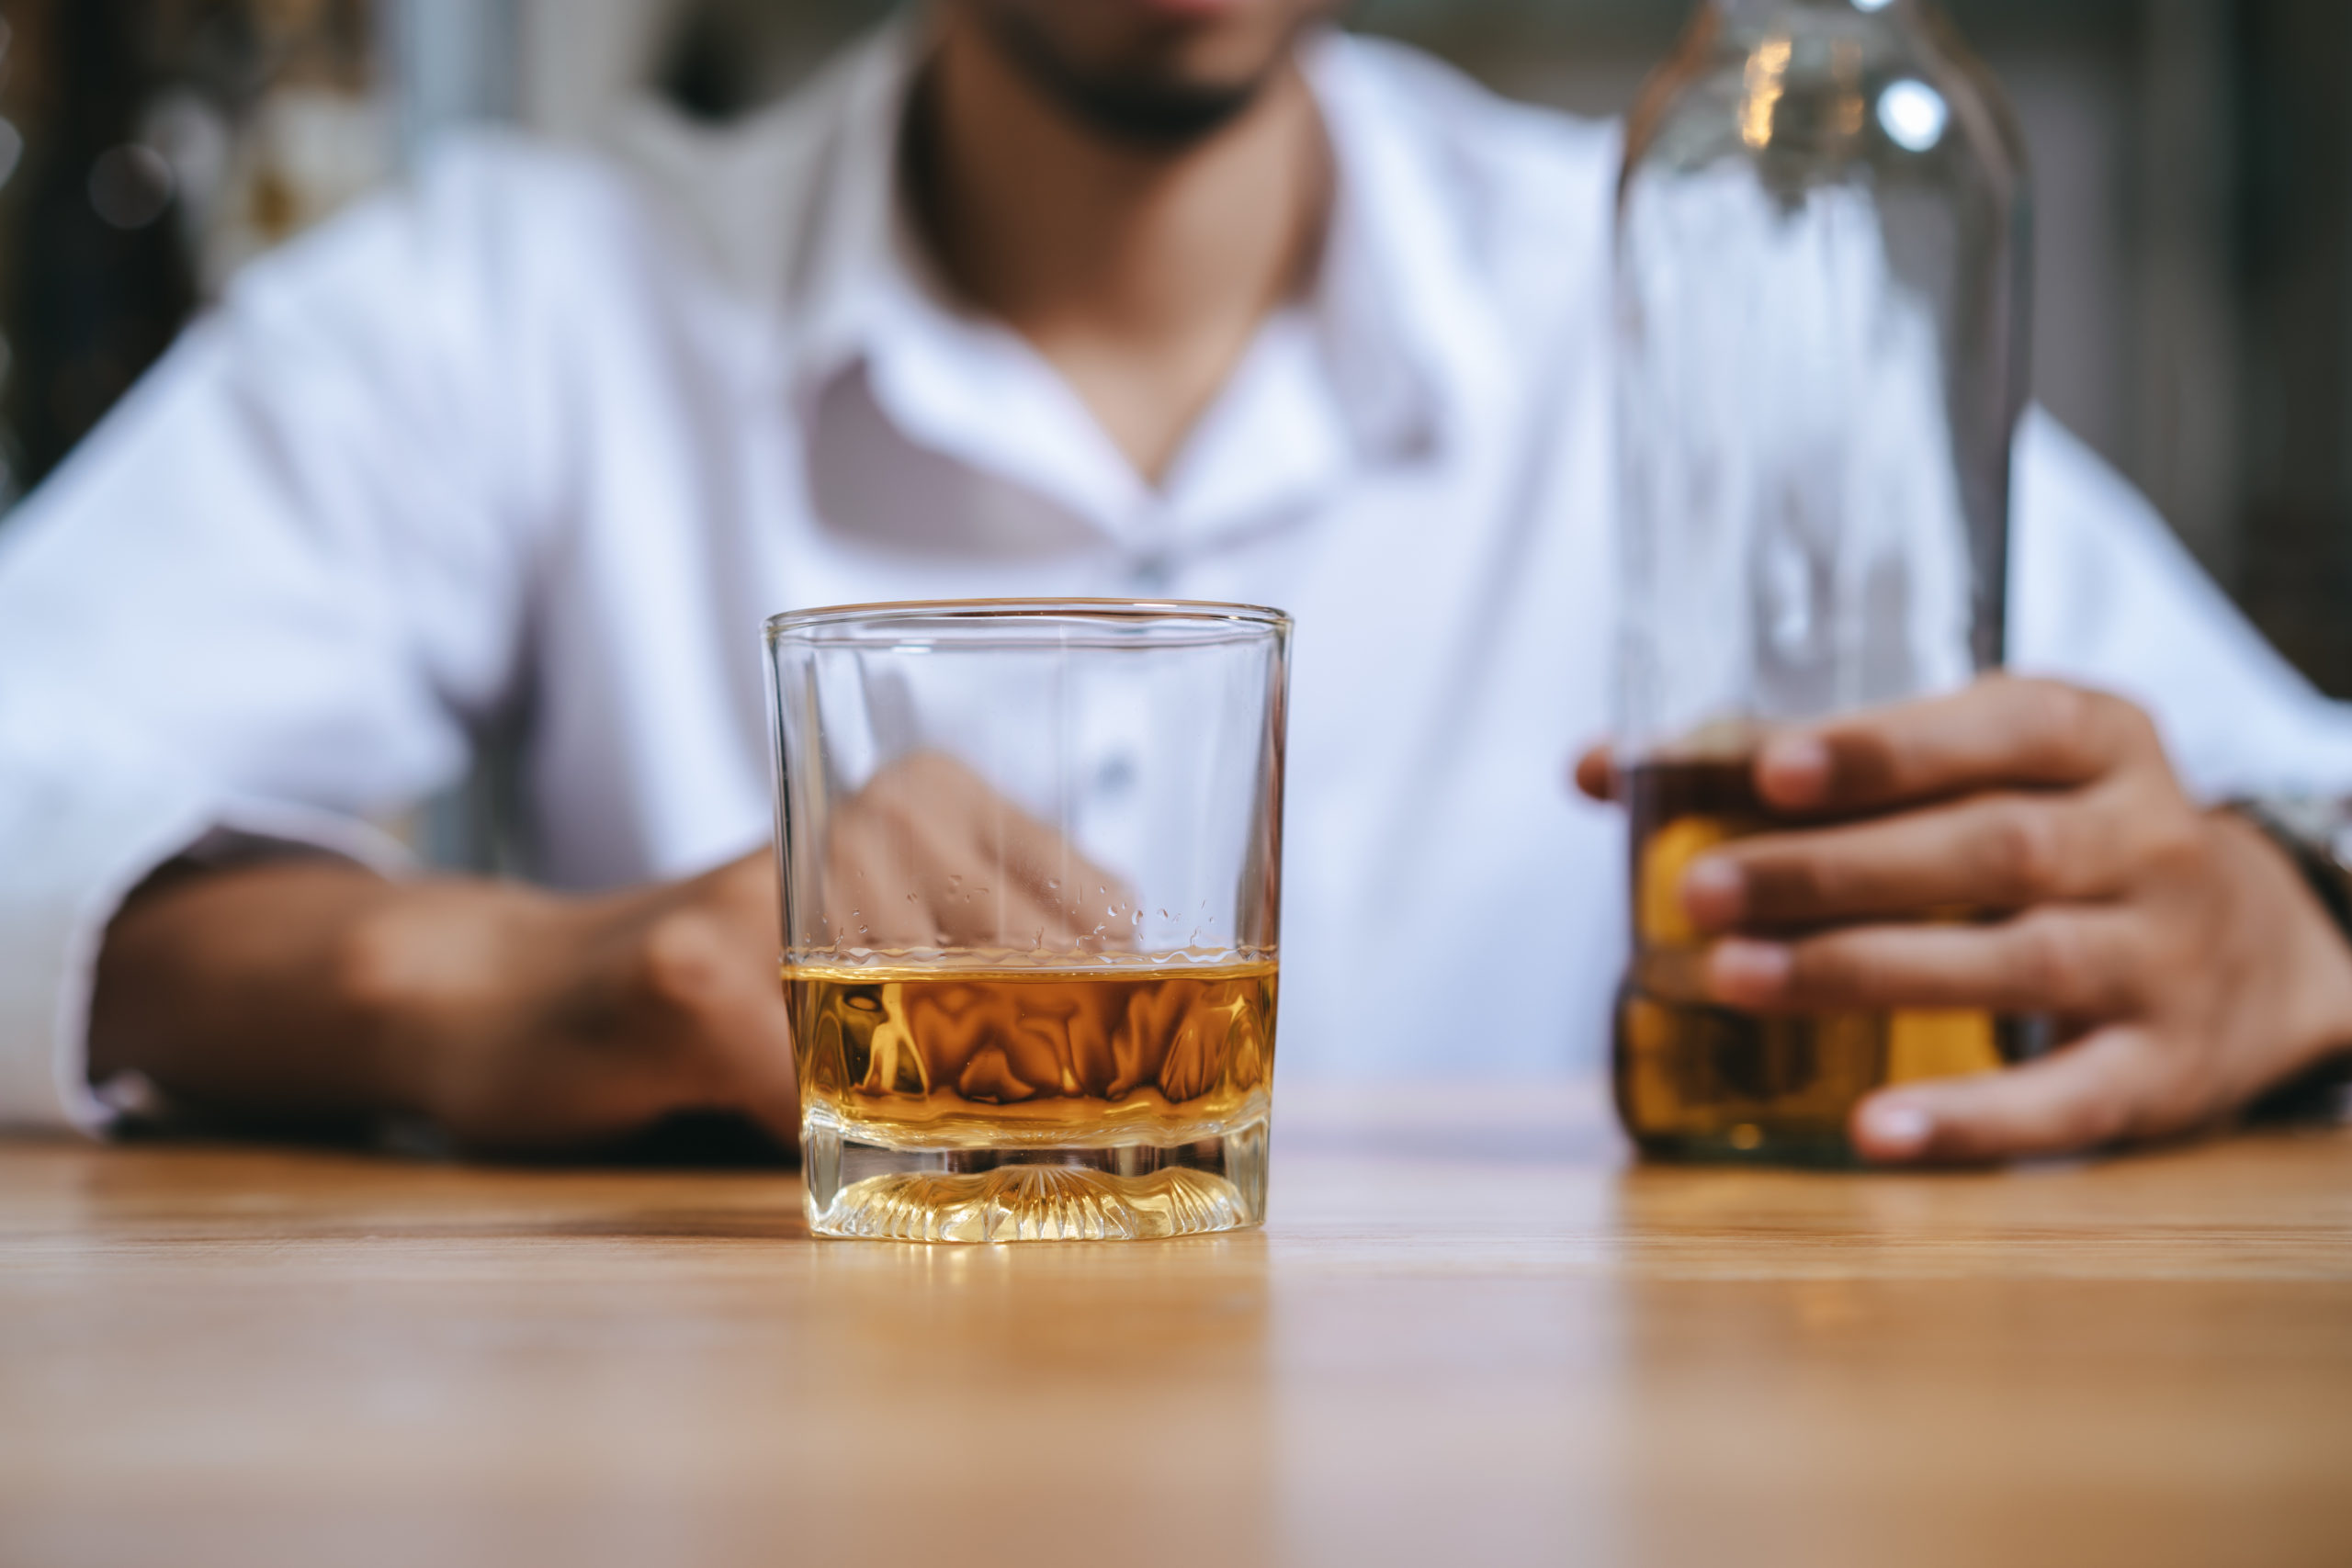 Men Advised To Limit Alcohol Consumption To One Drink Per Day